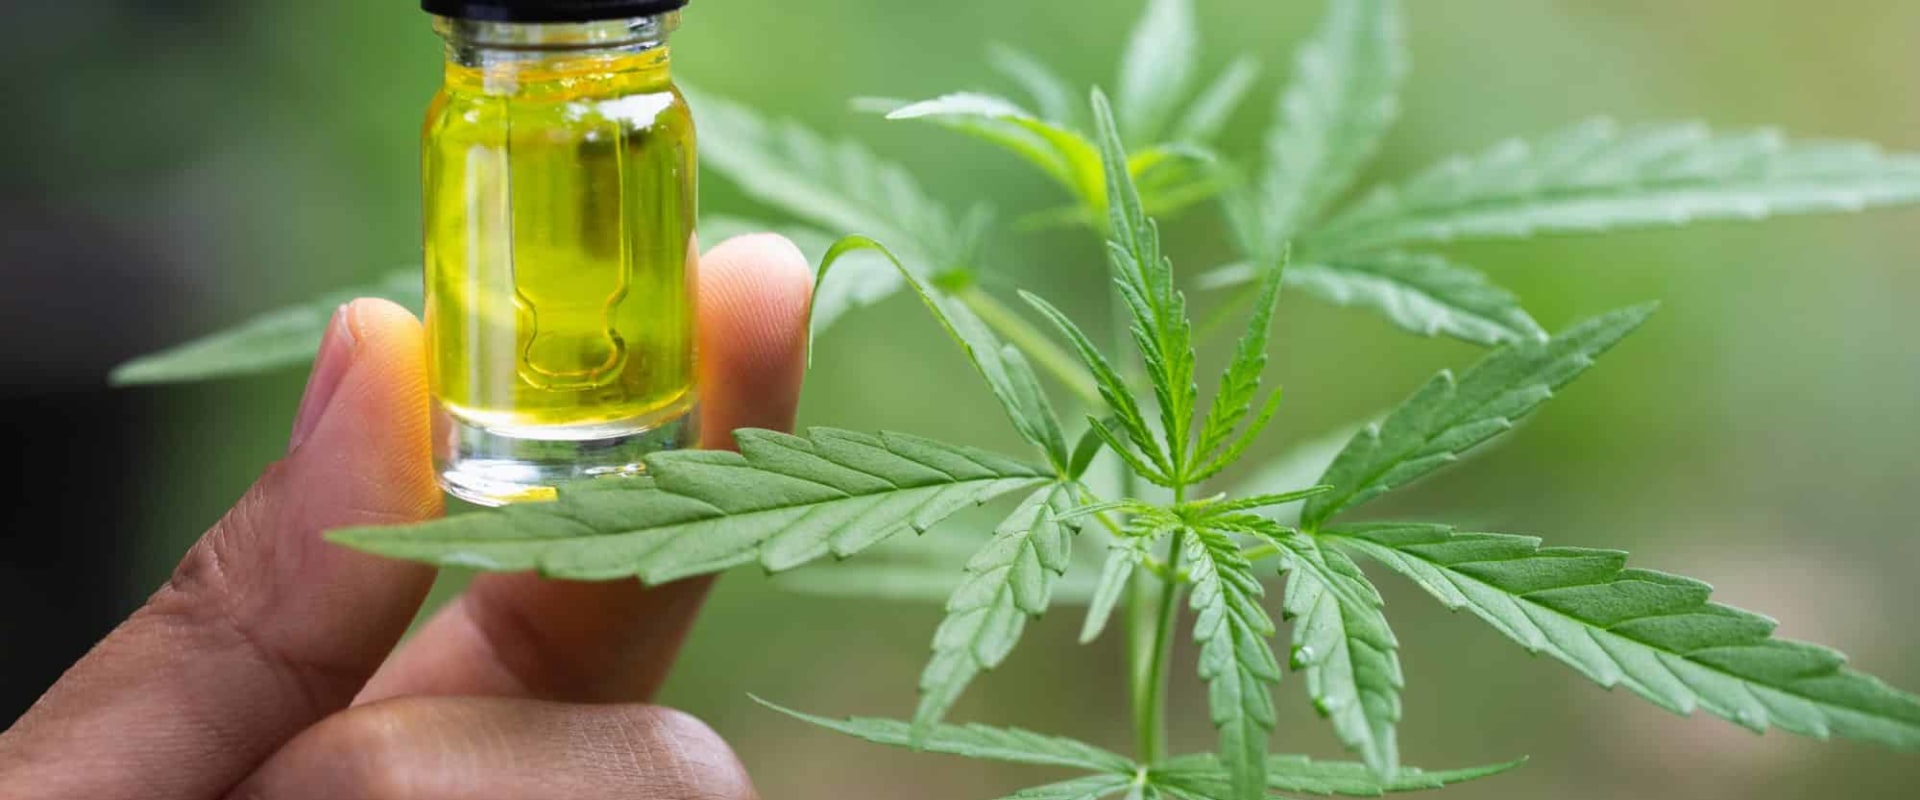 The Truth About CBD and Marijuana: What You Need to Know